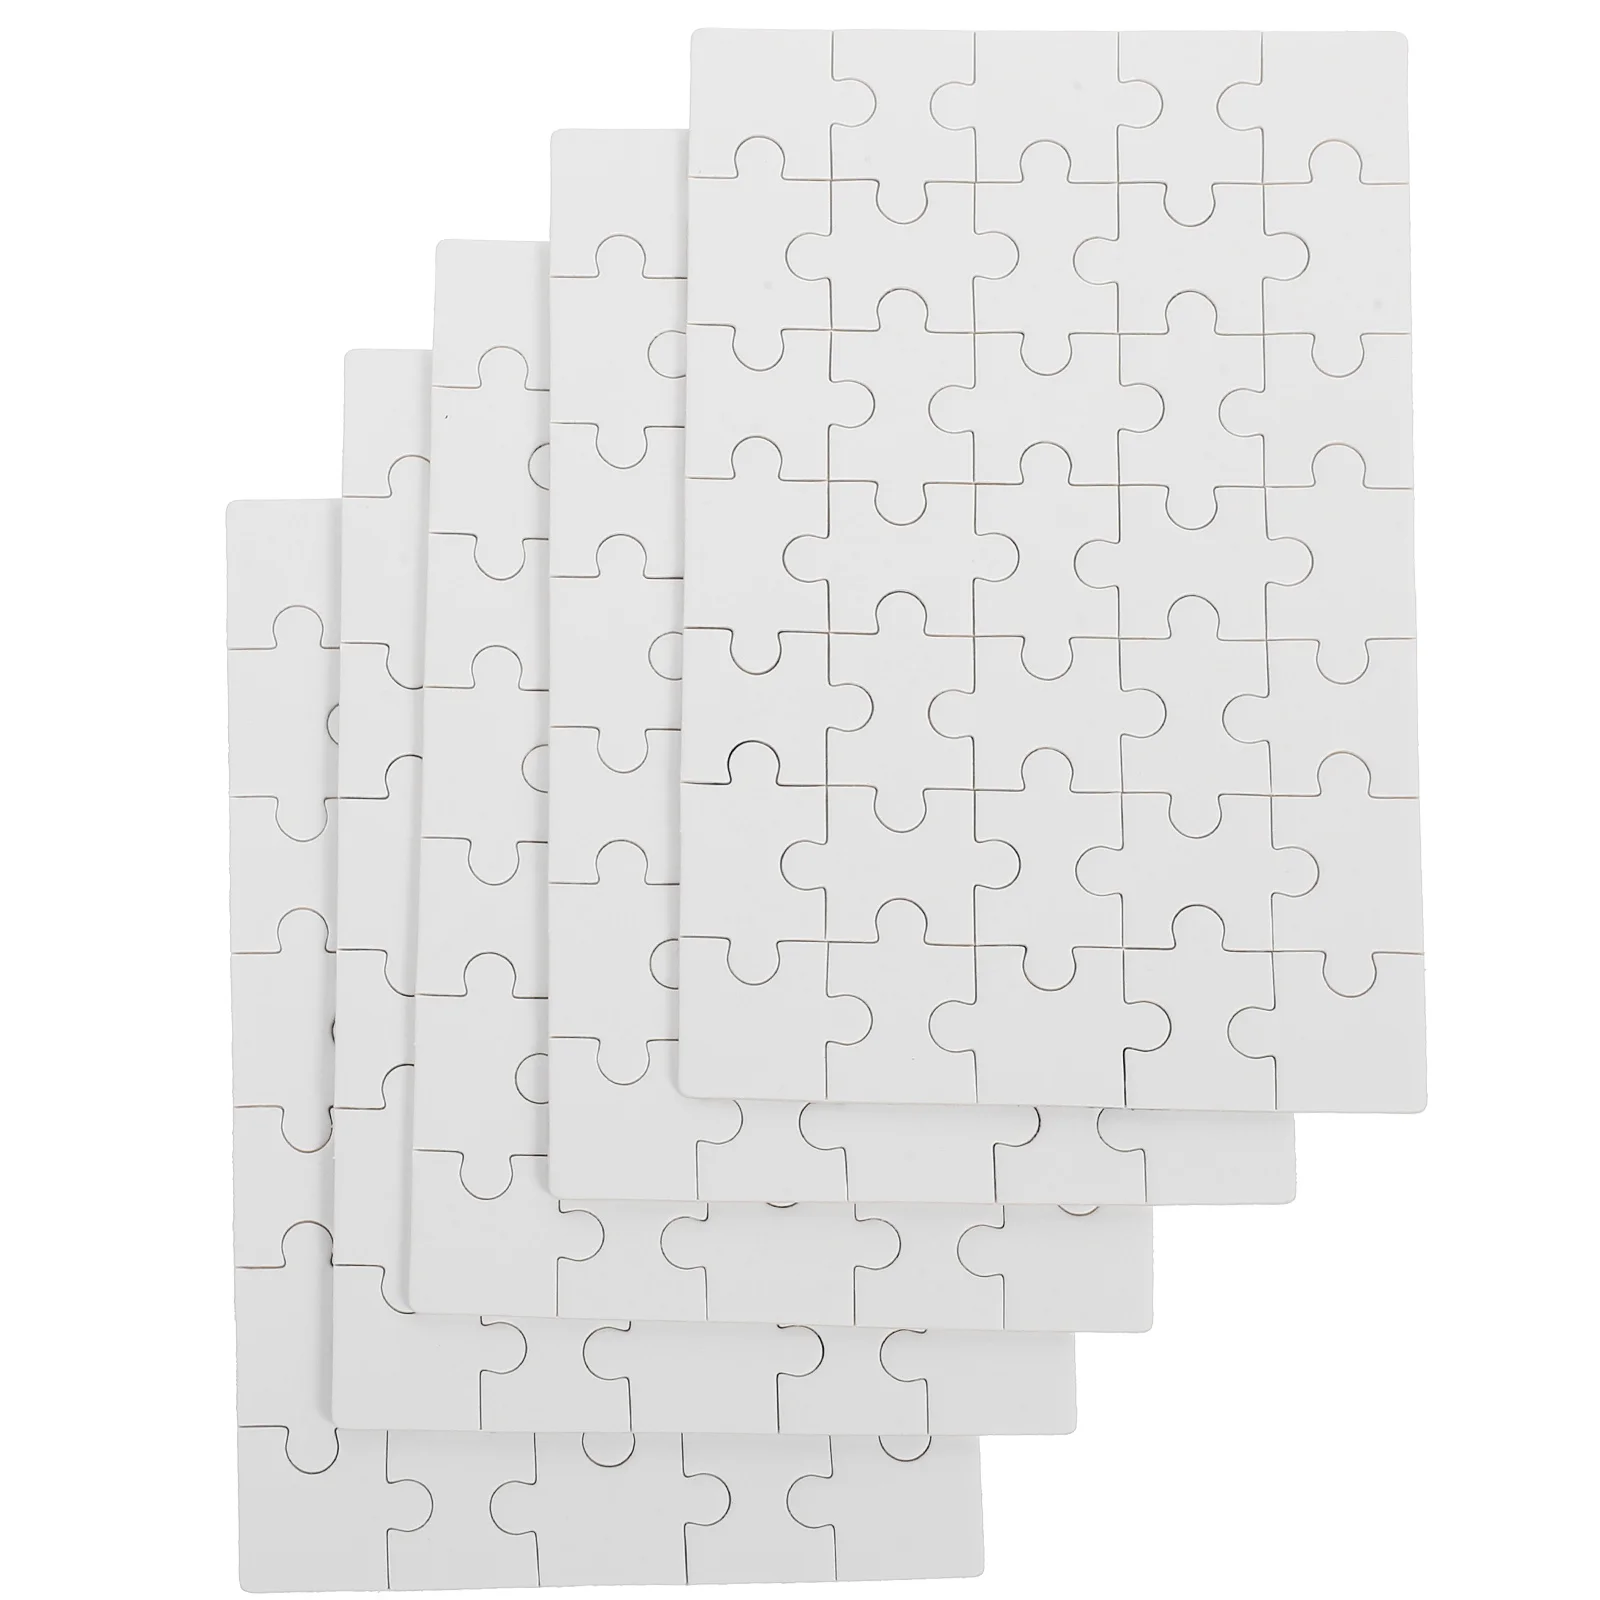 

DIY Blank Puzzle Blank Puzzle For Decorating Craft Blank Jigsaw Puzzle Pieces for Thermal Transfer Puzzle Craft